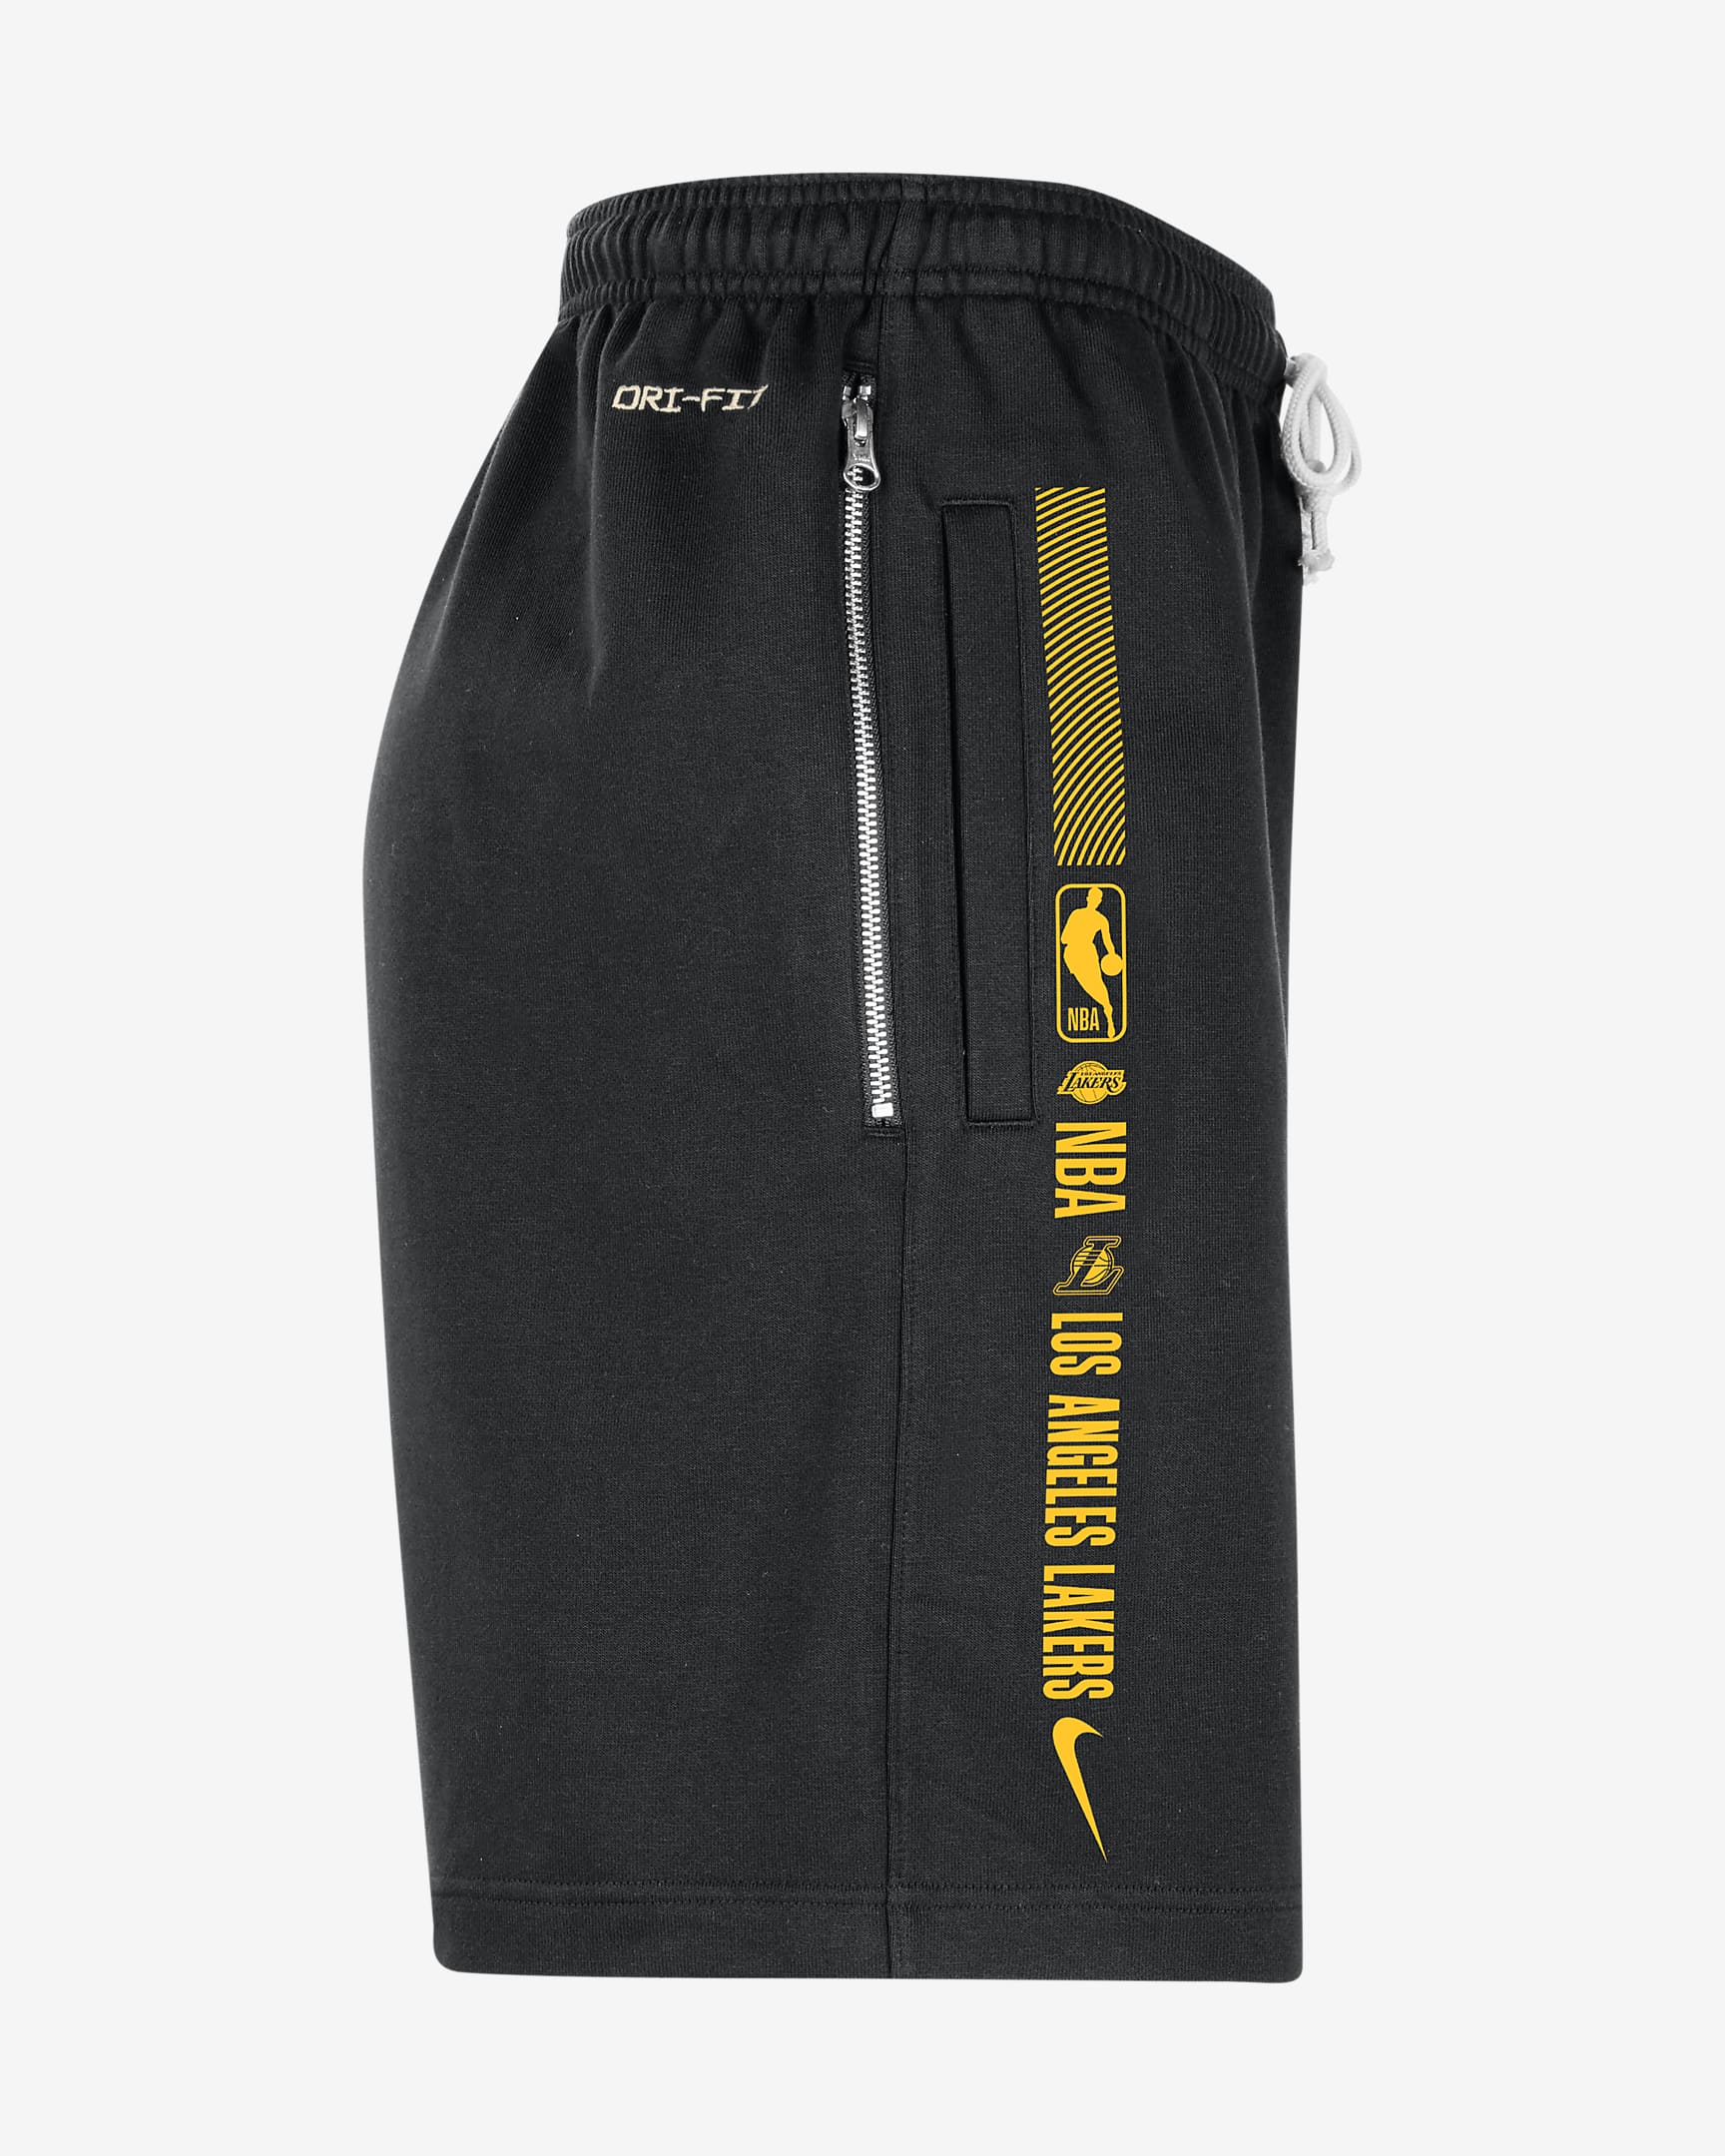 Mens Los Angeles Lakers Standard Issue Fleece Shorts